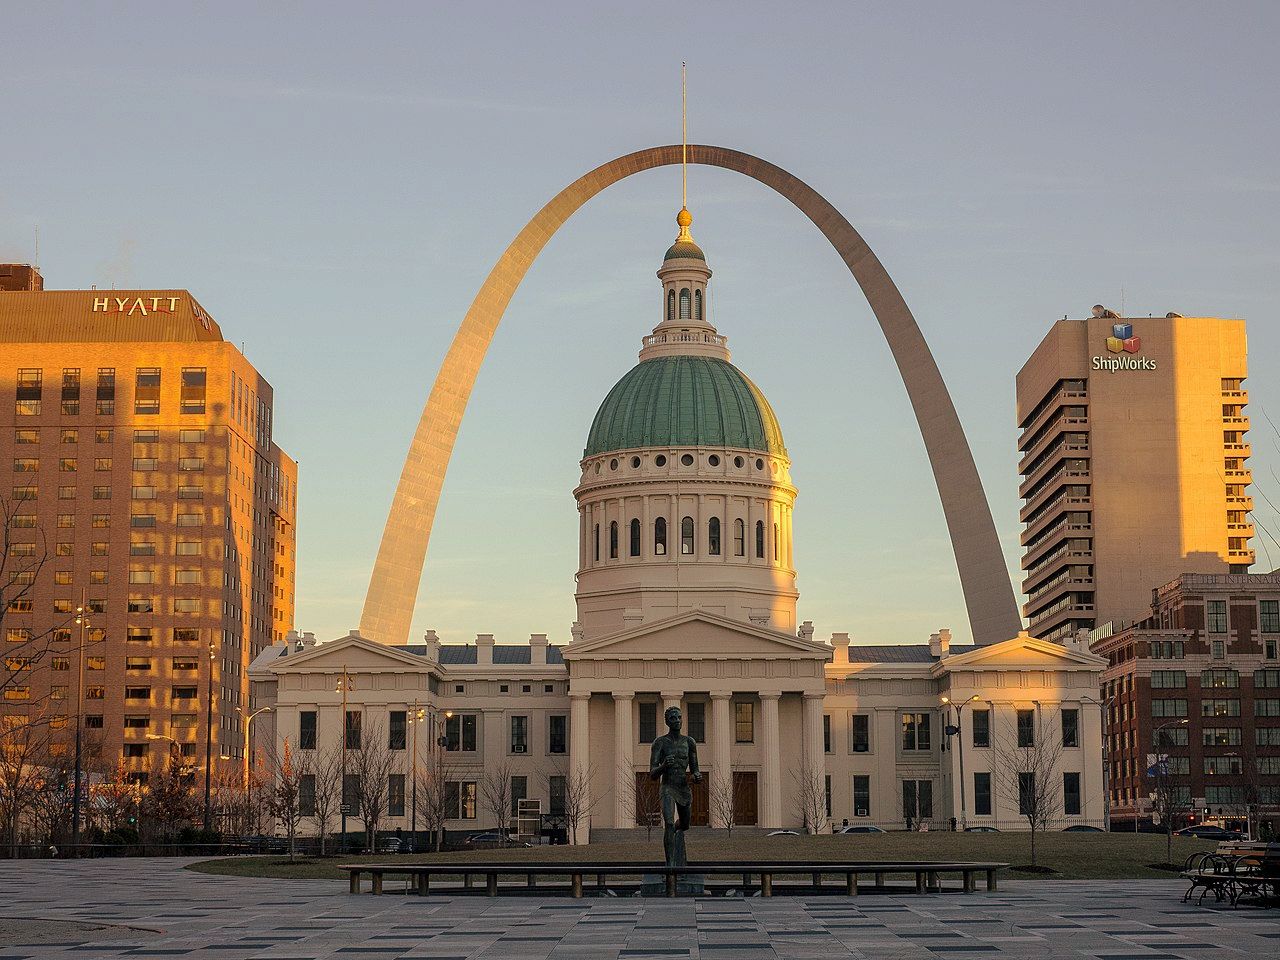 St louis arch at sunset